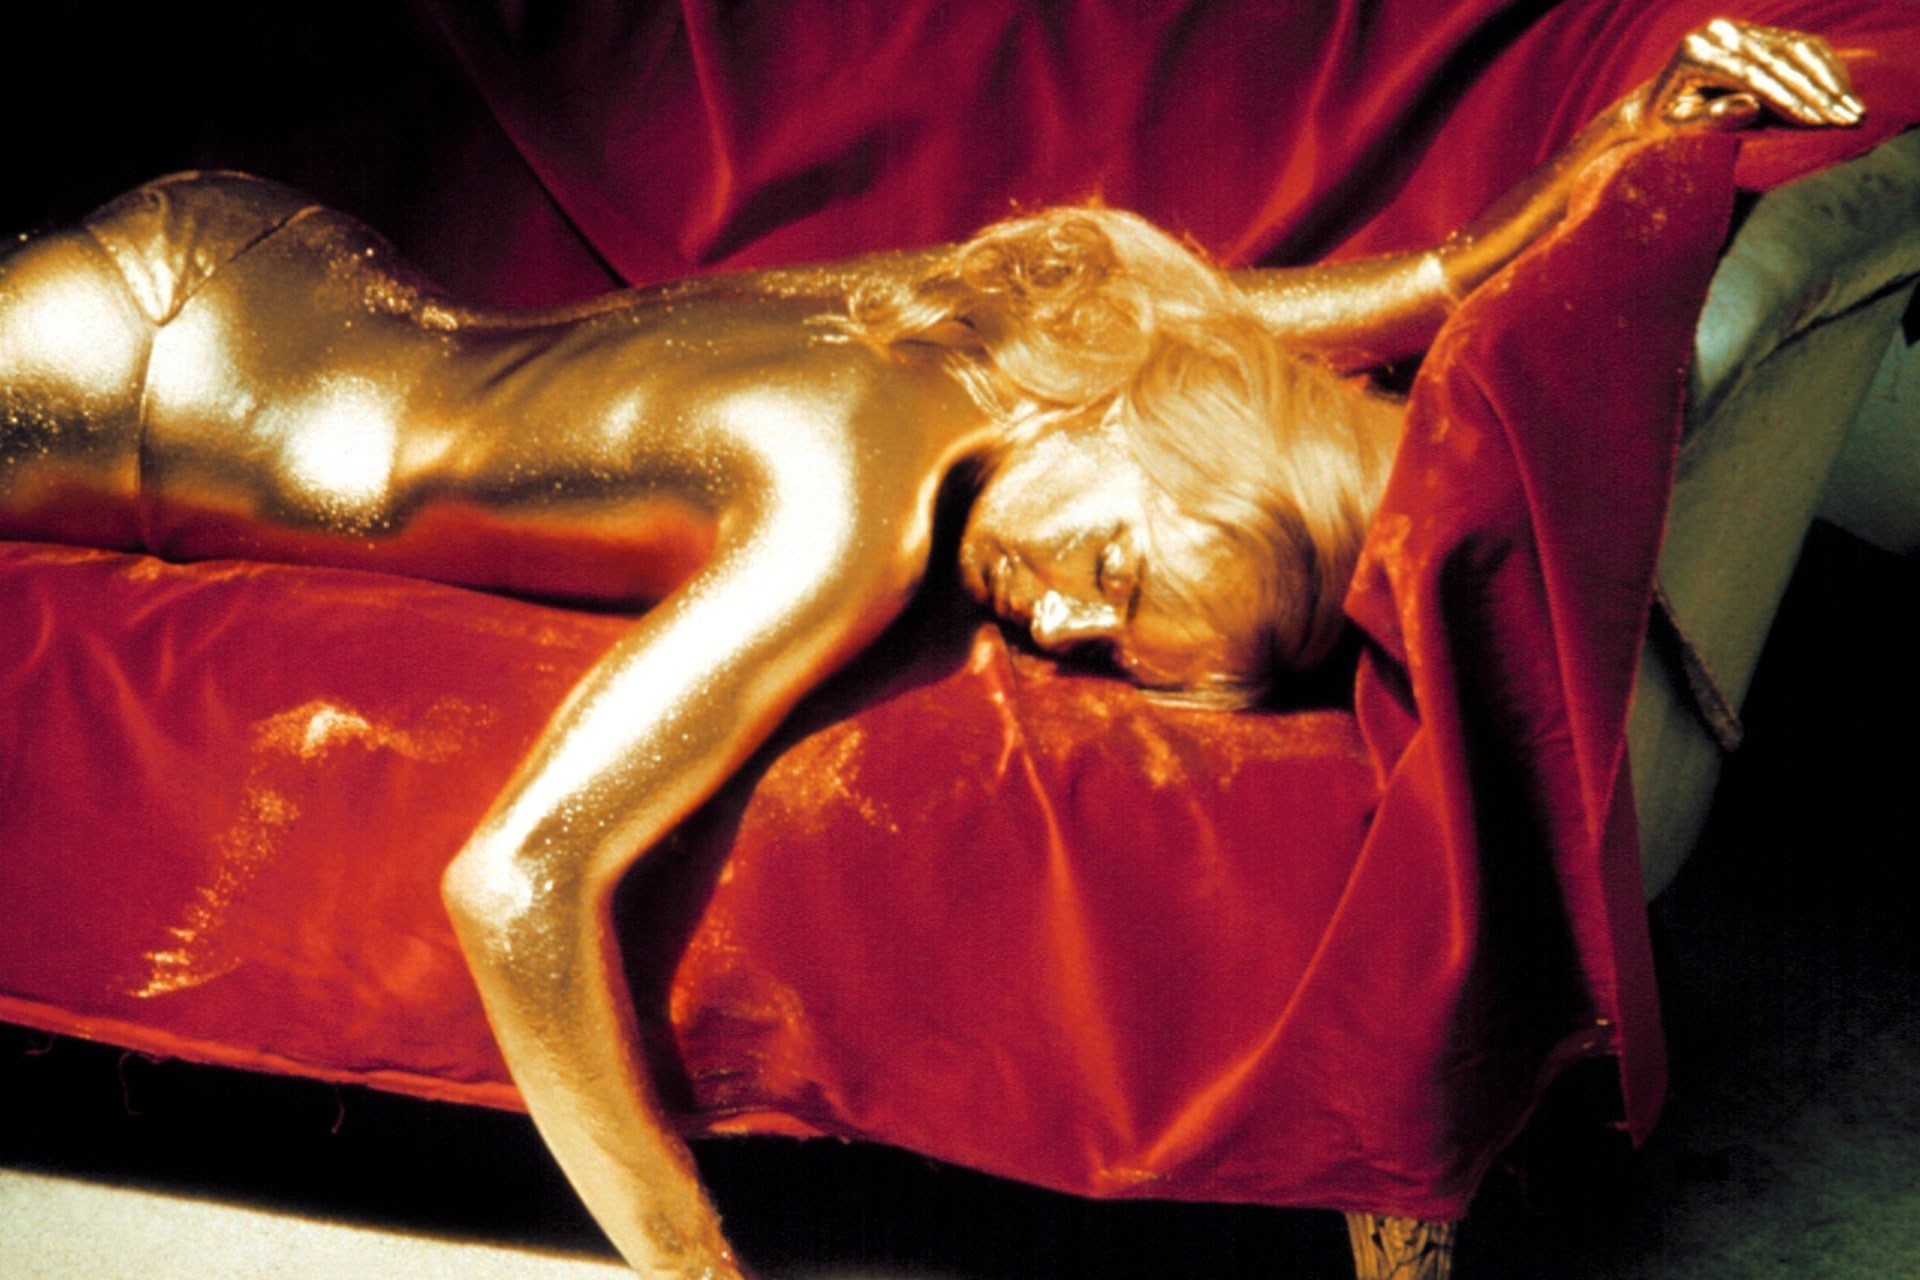 In "Goldfinger," Tilly Masterson dies of skin suffocation by being painted gold.  For years, it was thought that this method of murder was supposedly inspired by the real life death of a model who had the same thing happen to her at a photoshoot. The TV program "Mythbusters" has since proven that to be false.